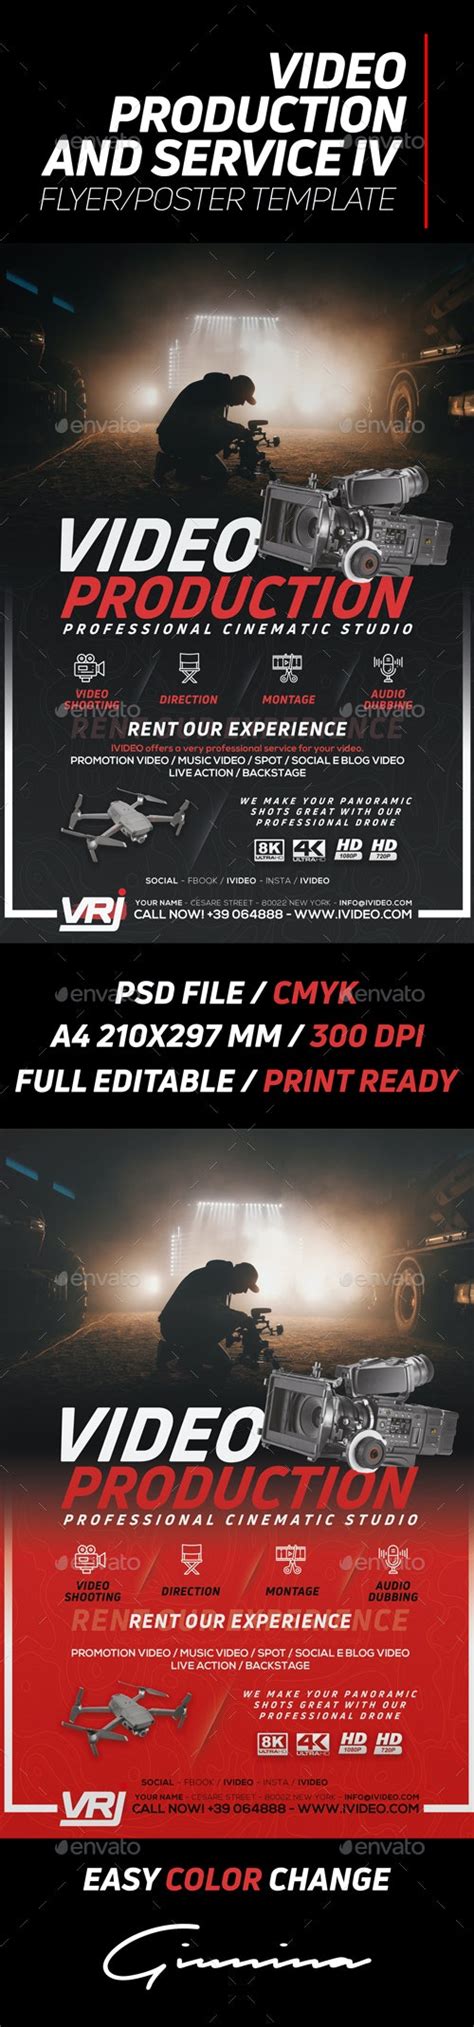 Video Production And Services 4 Flyerposter Print Templates